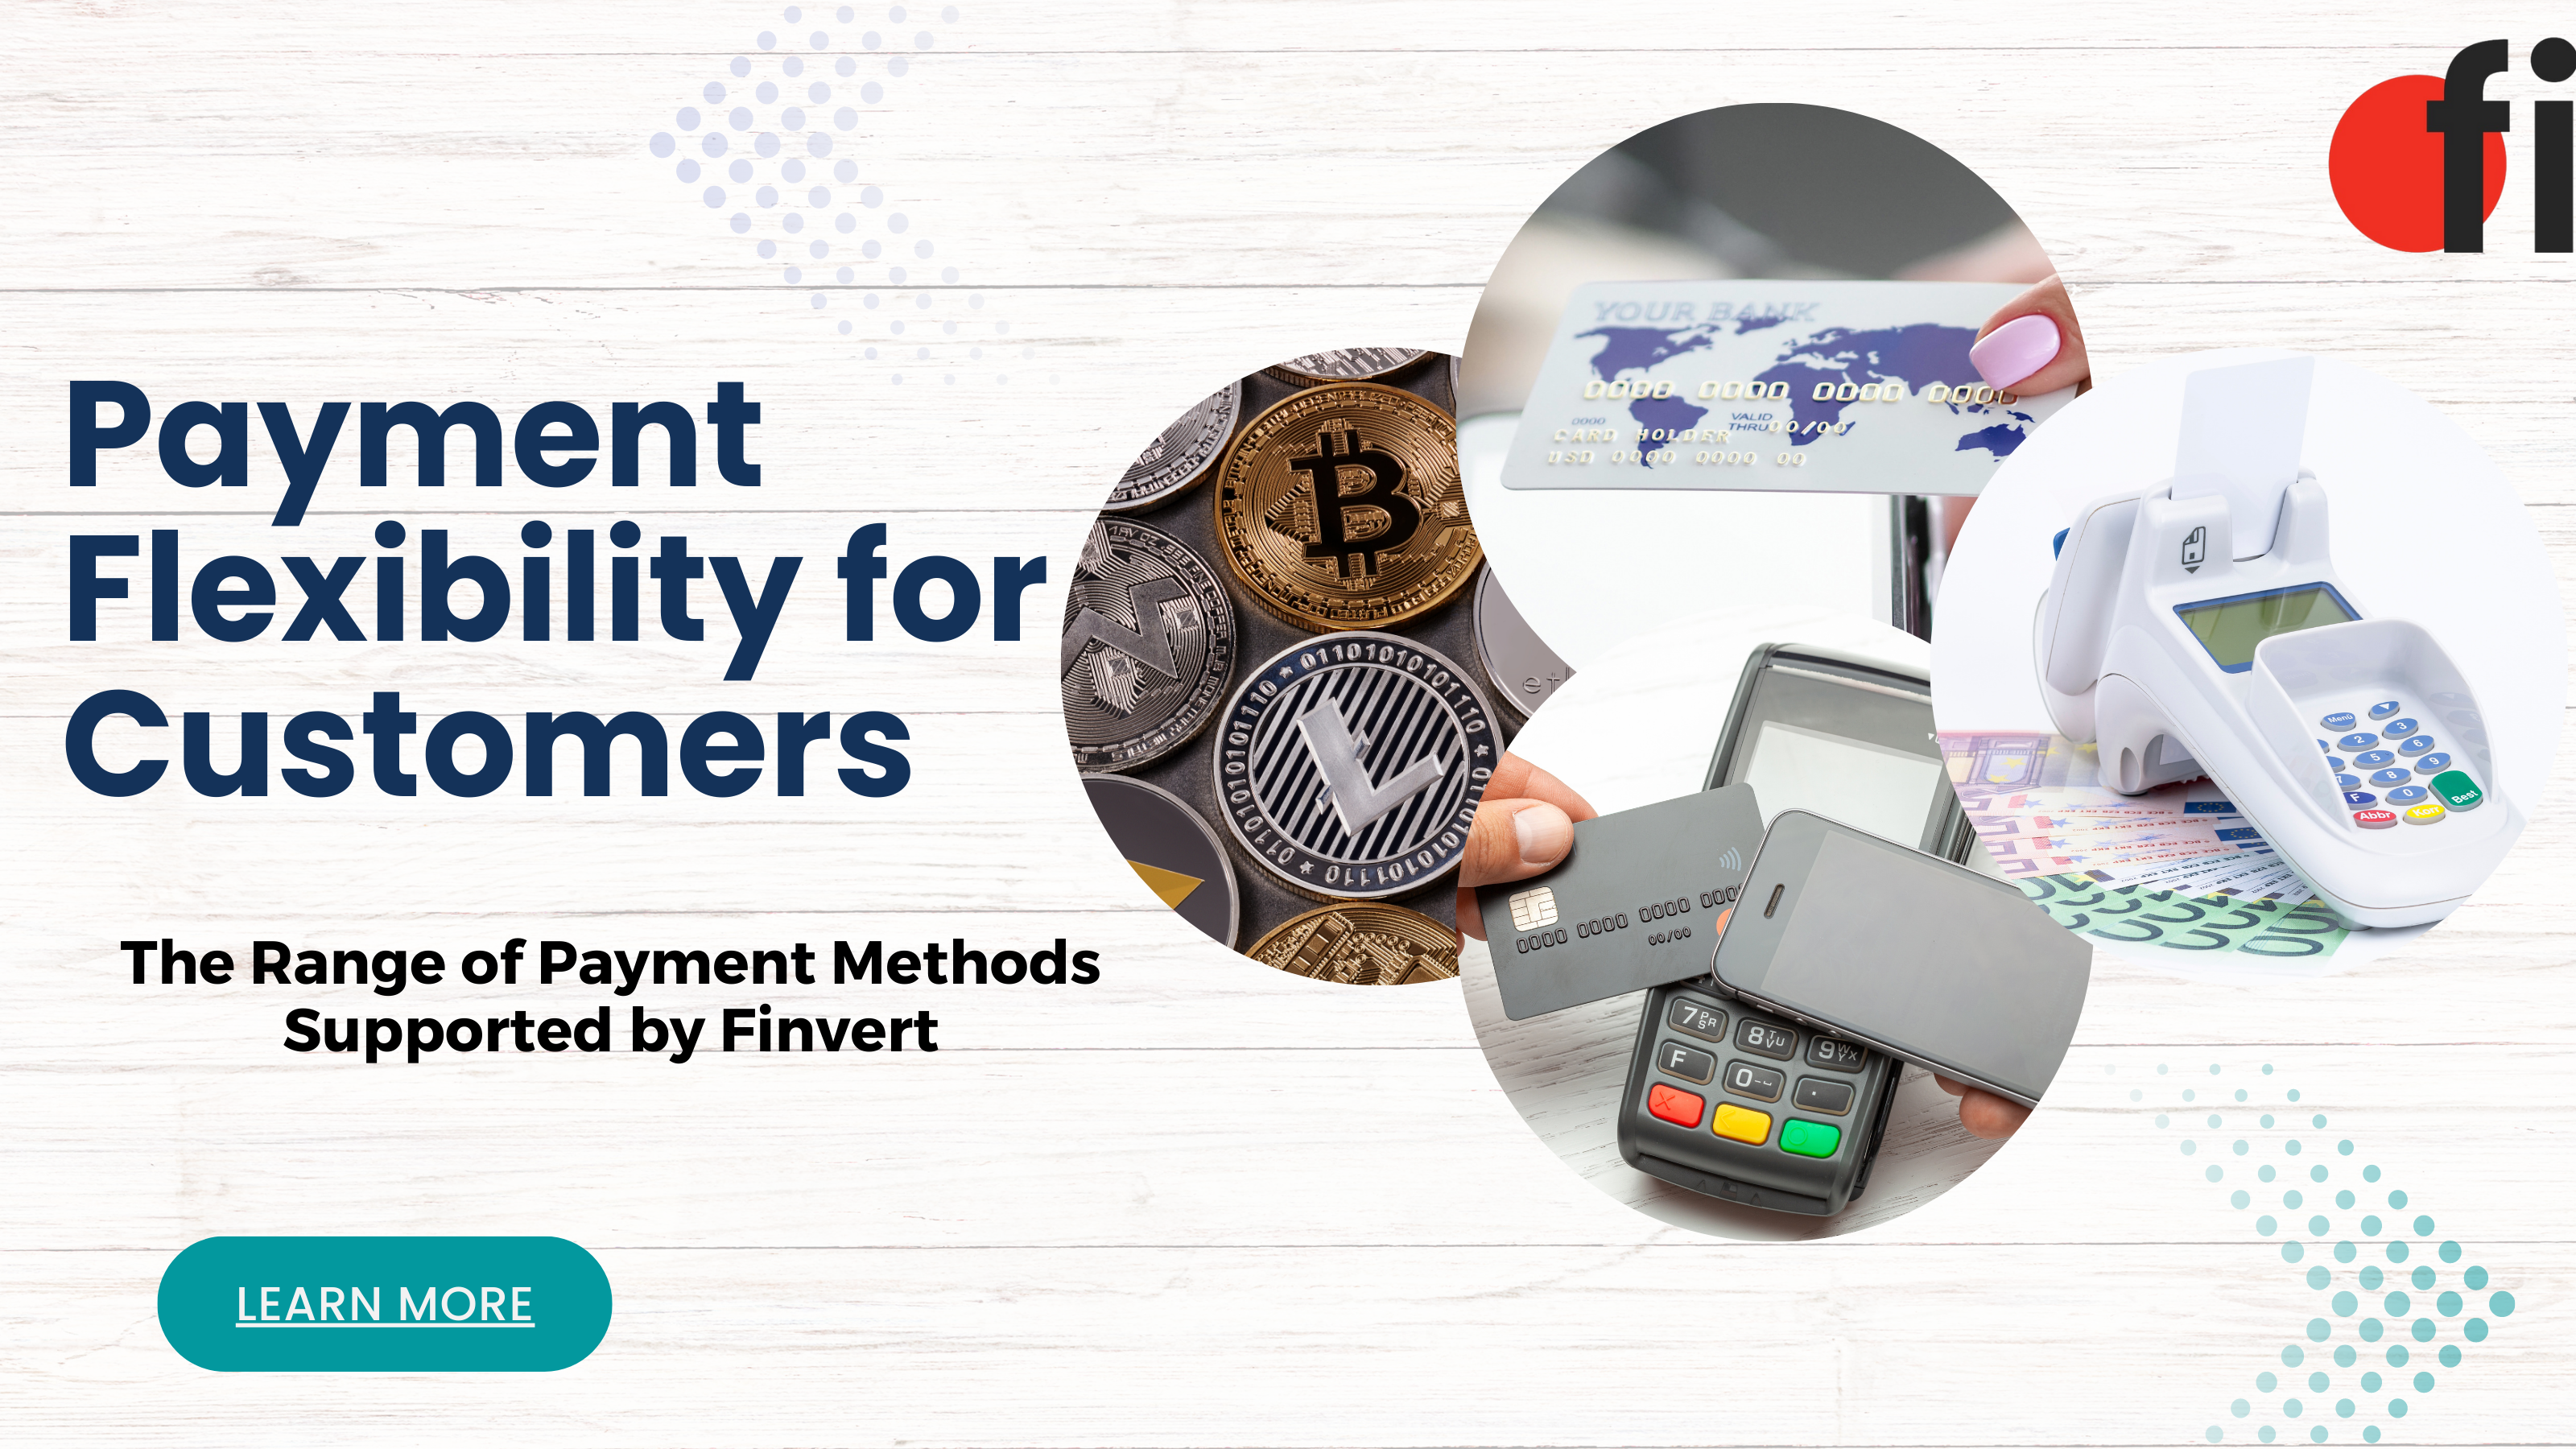 The Range of Payment Methods Supported by Finvert